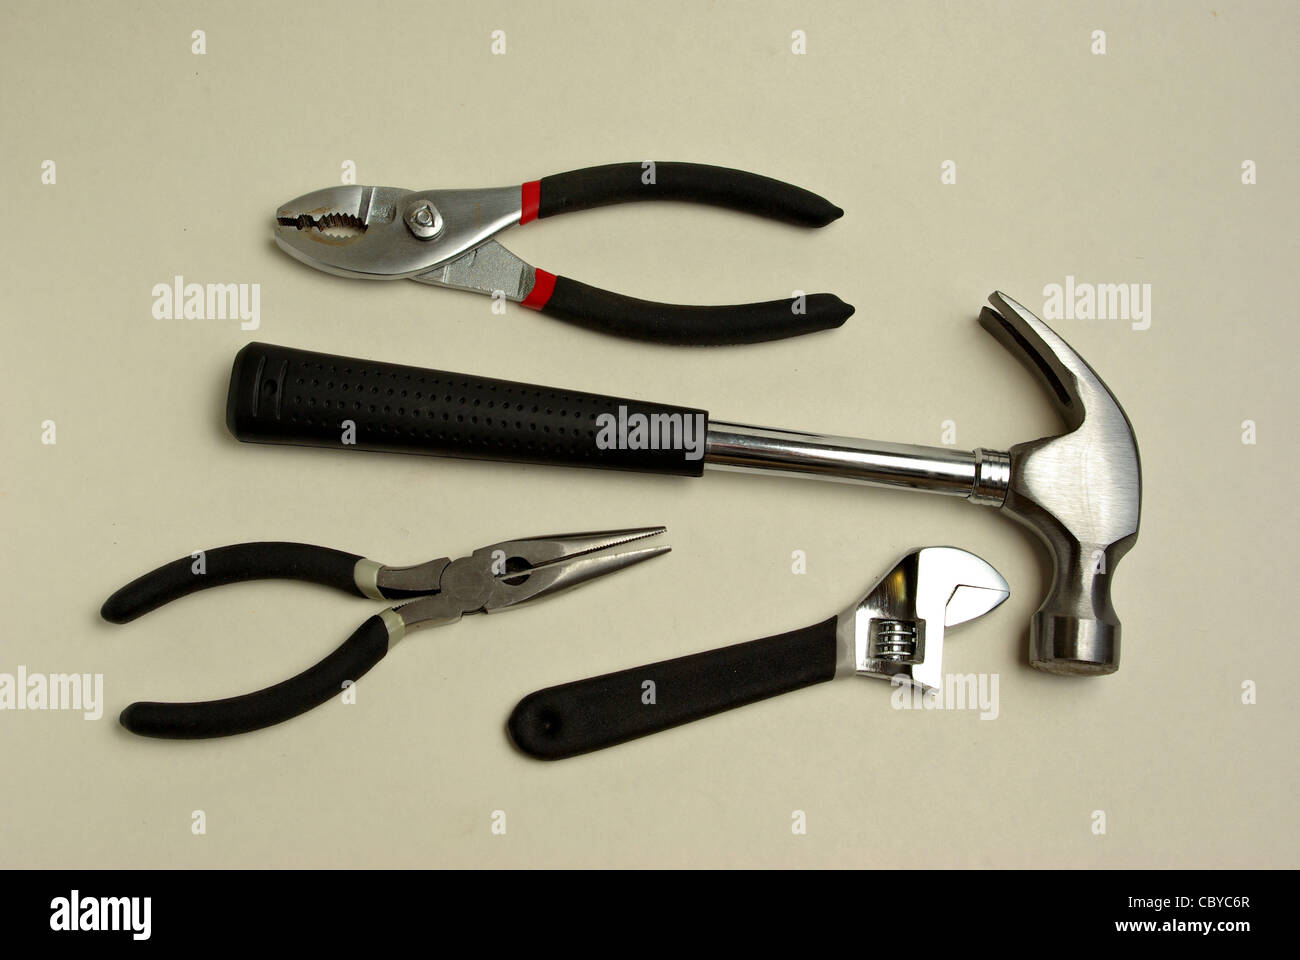 A hammer, needle nose pliers, pliers, adjustable wrench all sit on a white background. Stock Photo